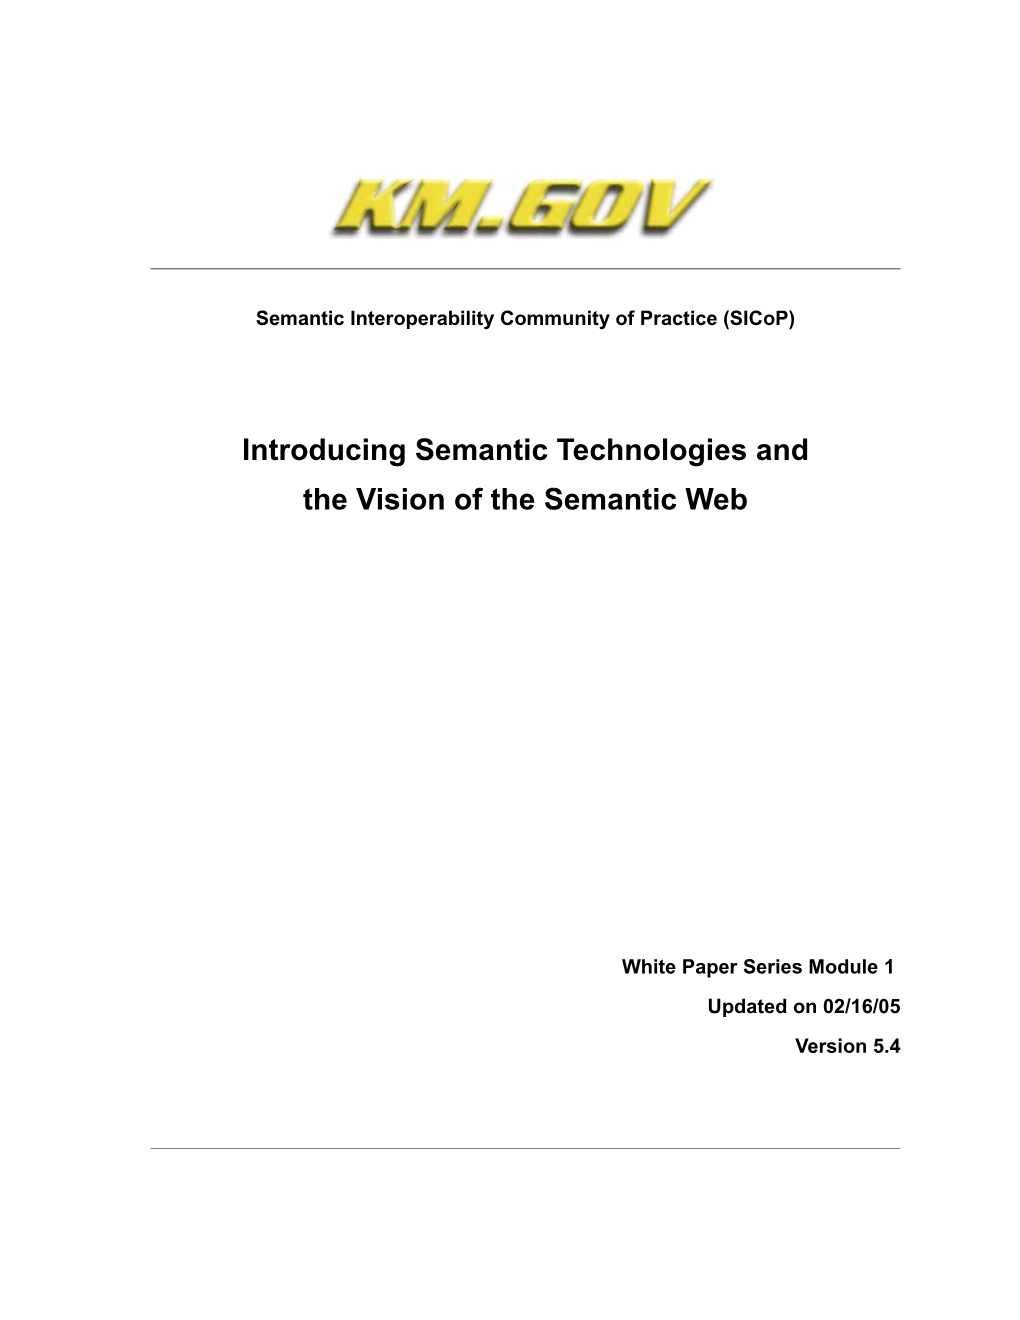 Introducing Semantic Technologies And The Vision Of The Semantic Web